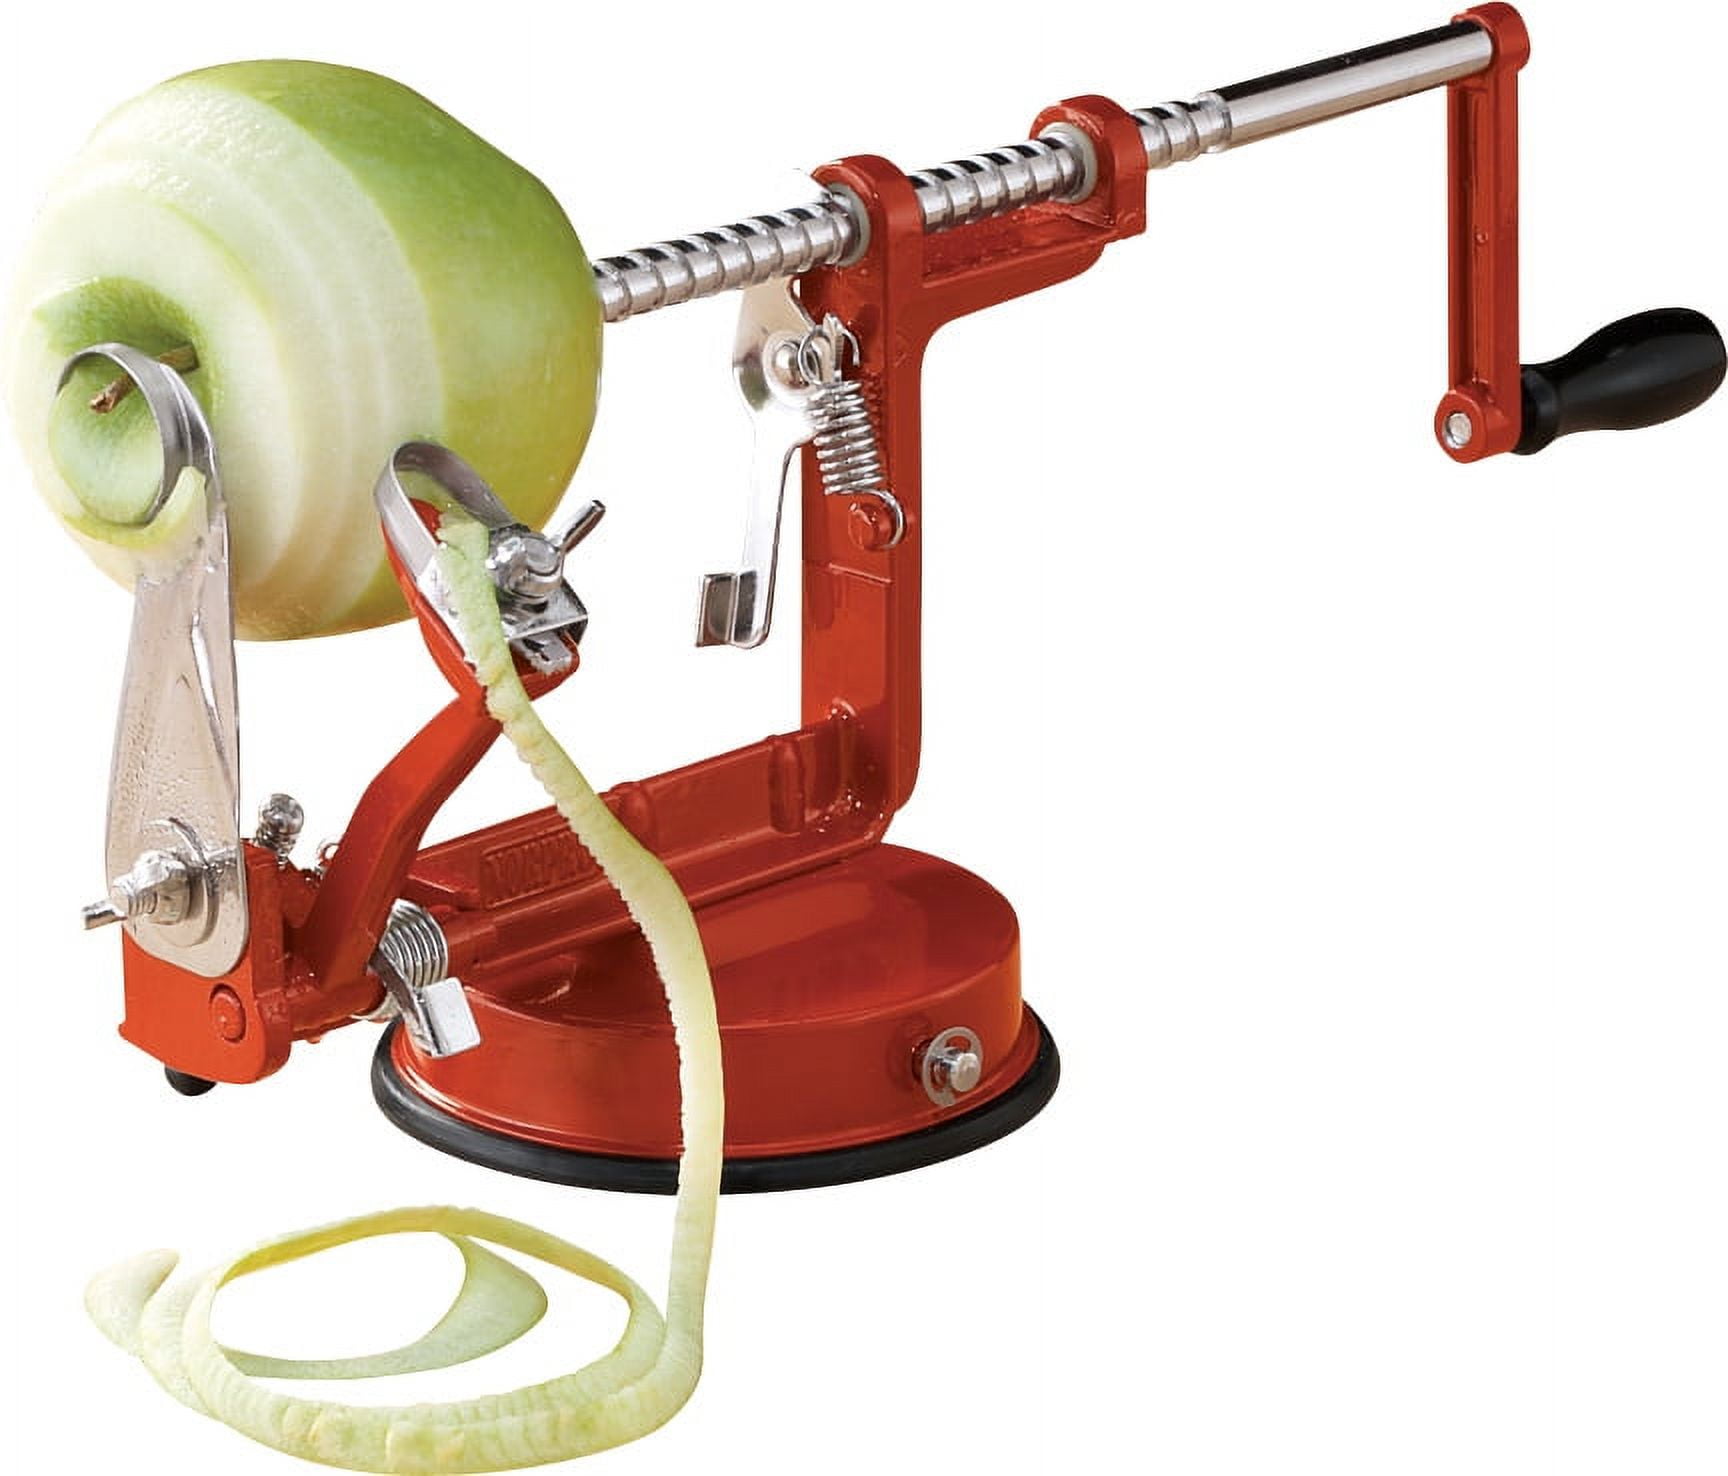 YYP Apple Peeler Corer, 5 In 1 Apple Peeler Slicer Corer, Durable Heavy  Duty Apple Peeler Slicer with Powerful Suction Base and Stainless Steel  Blades